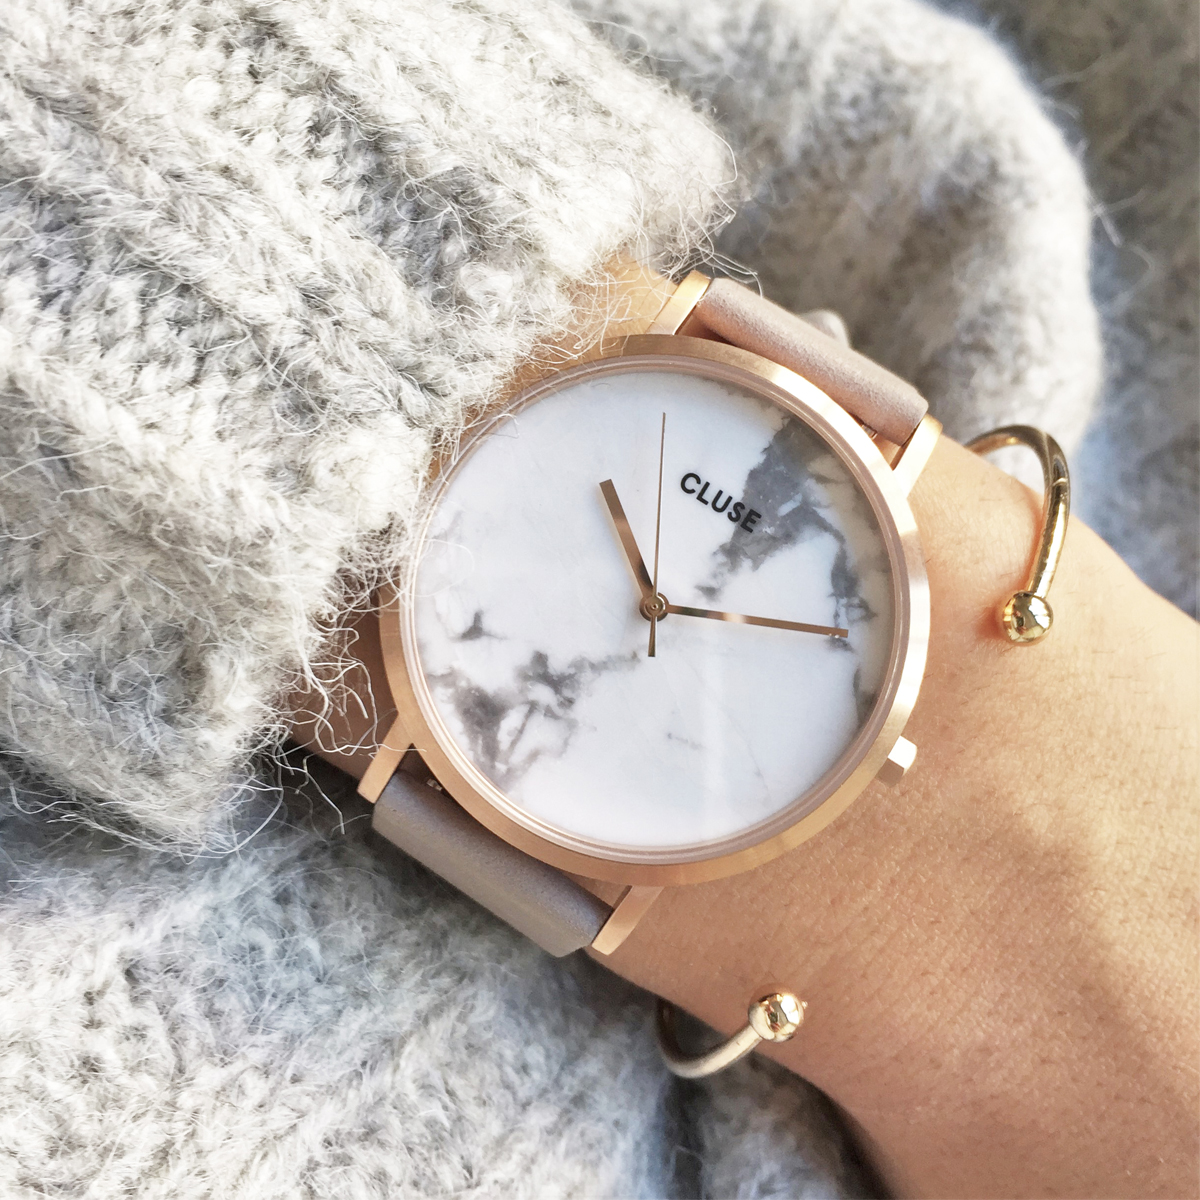 La roche in rose gold with white marble face.